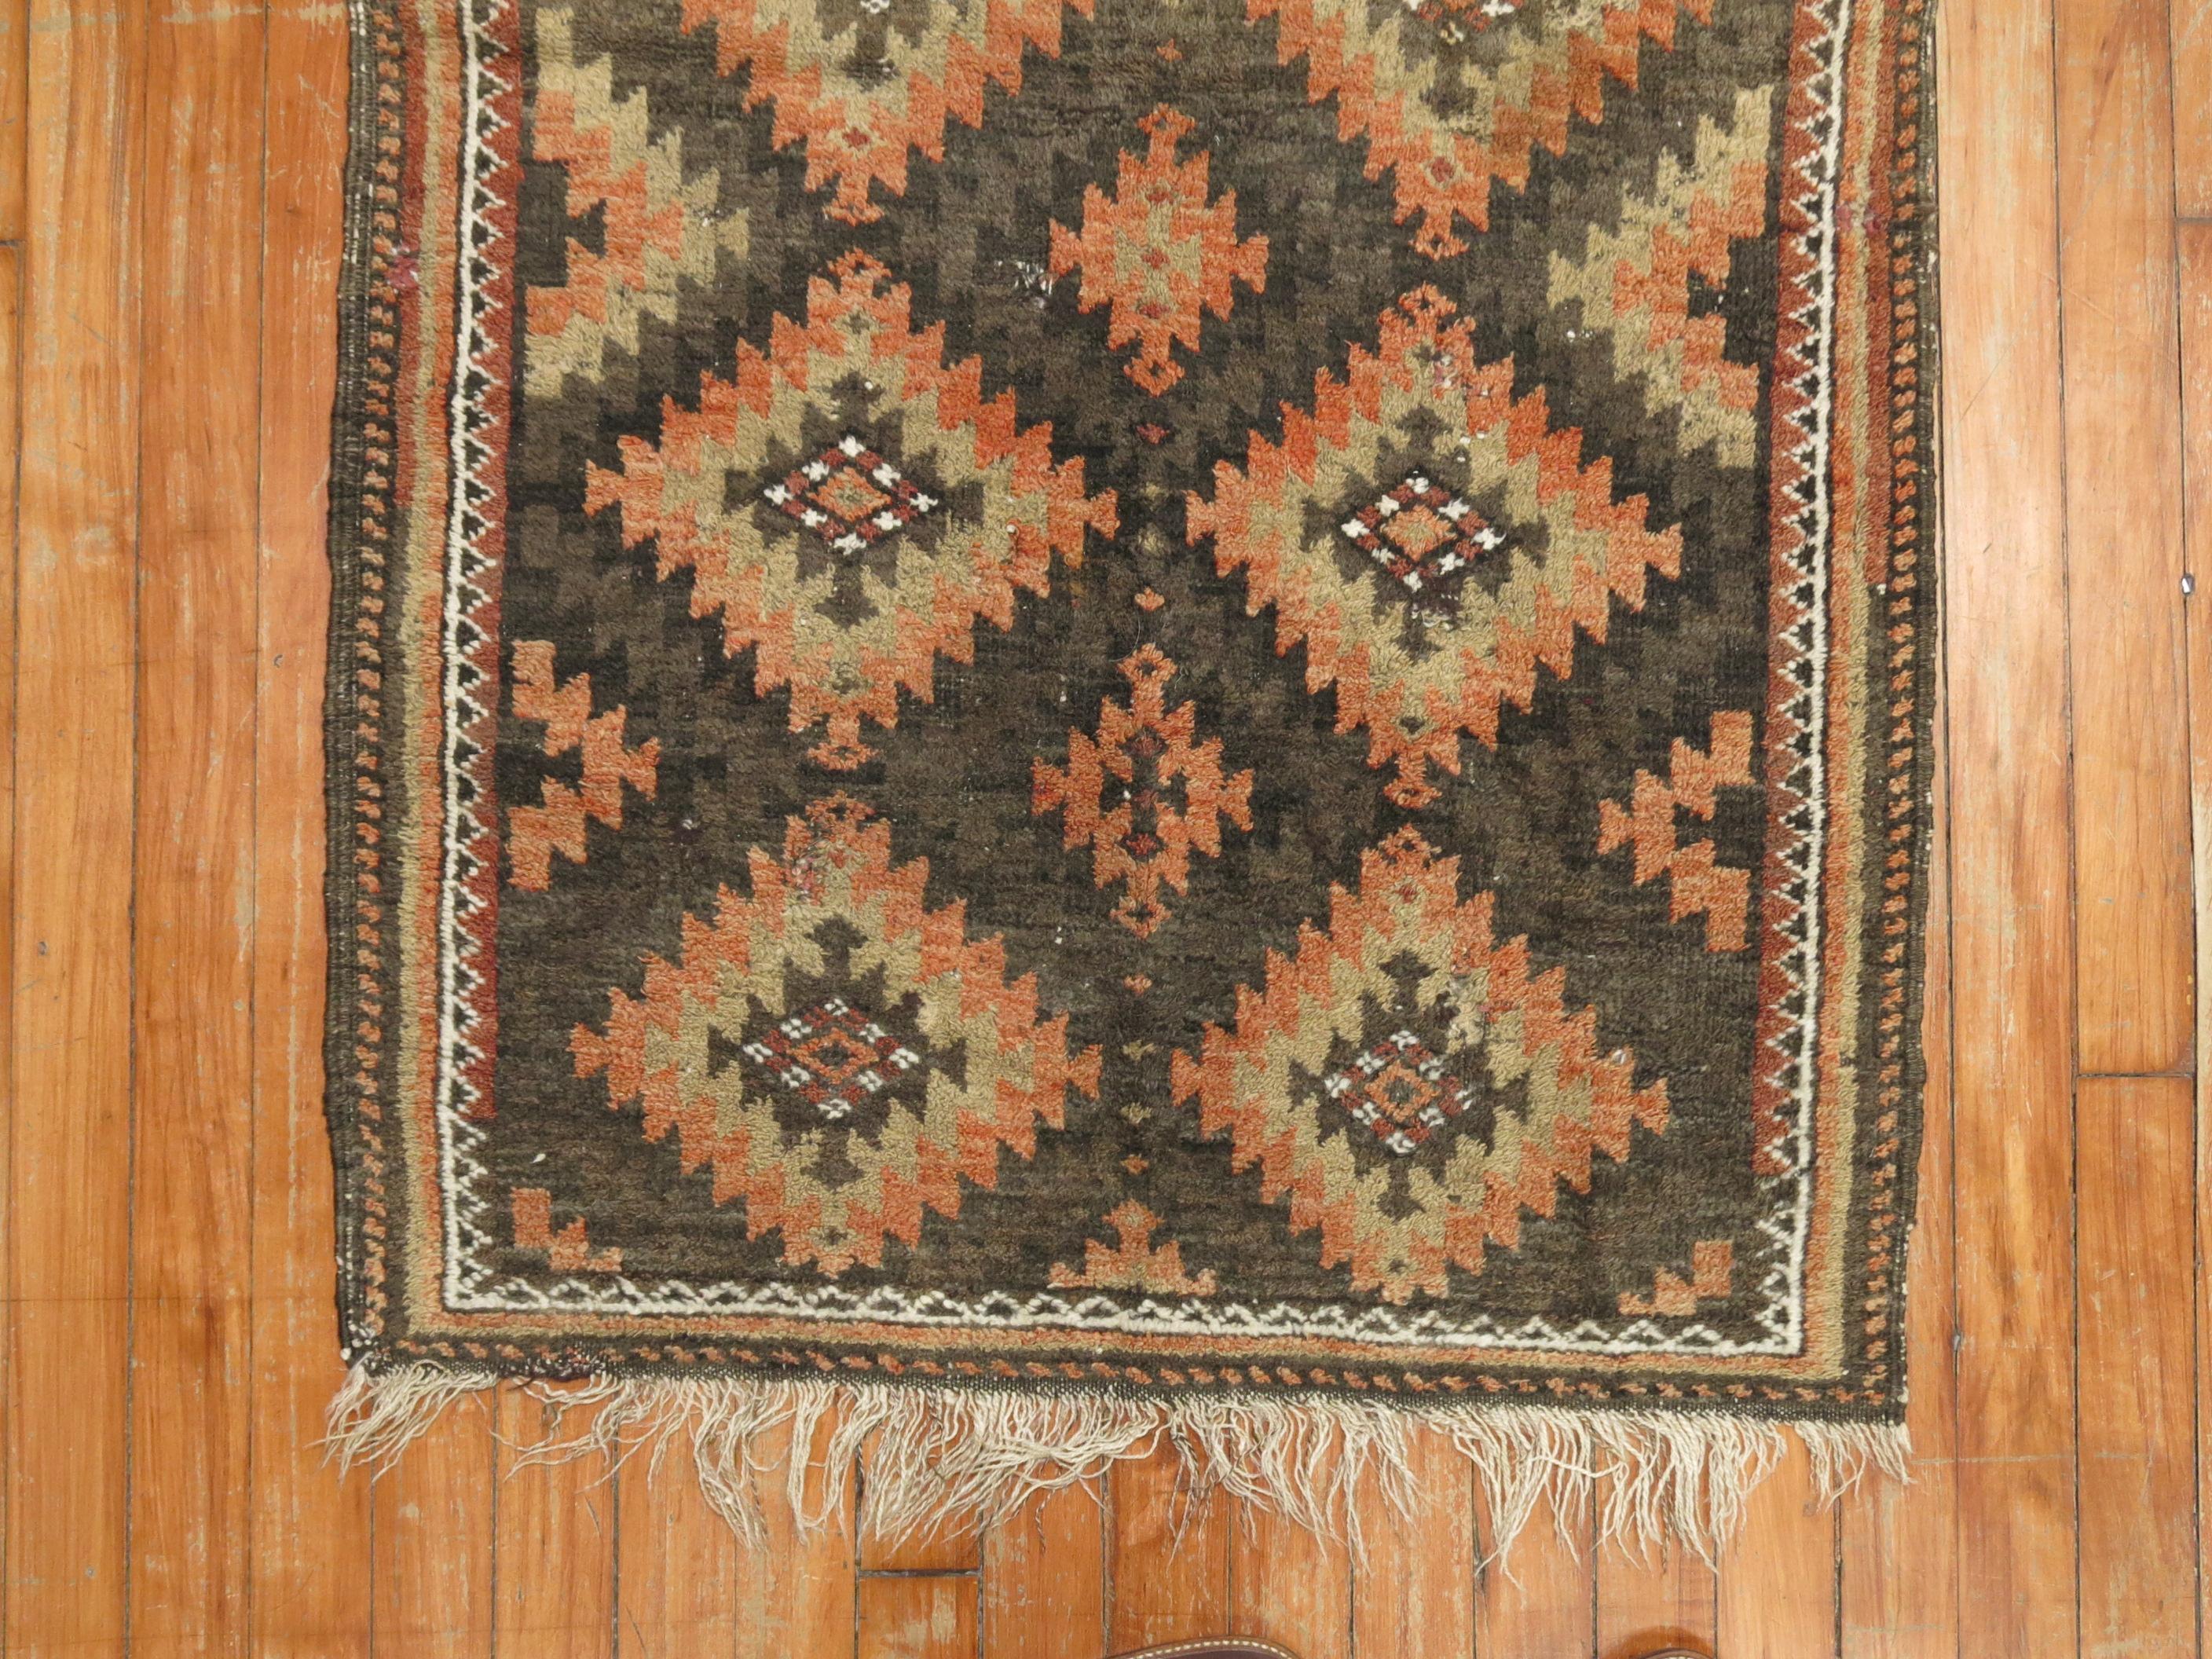 Tribal Brown Orange Color Persian Balouch Rug In Good Condition For Sale In New York, NY